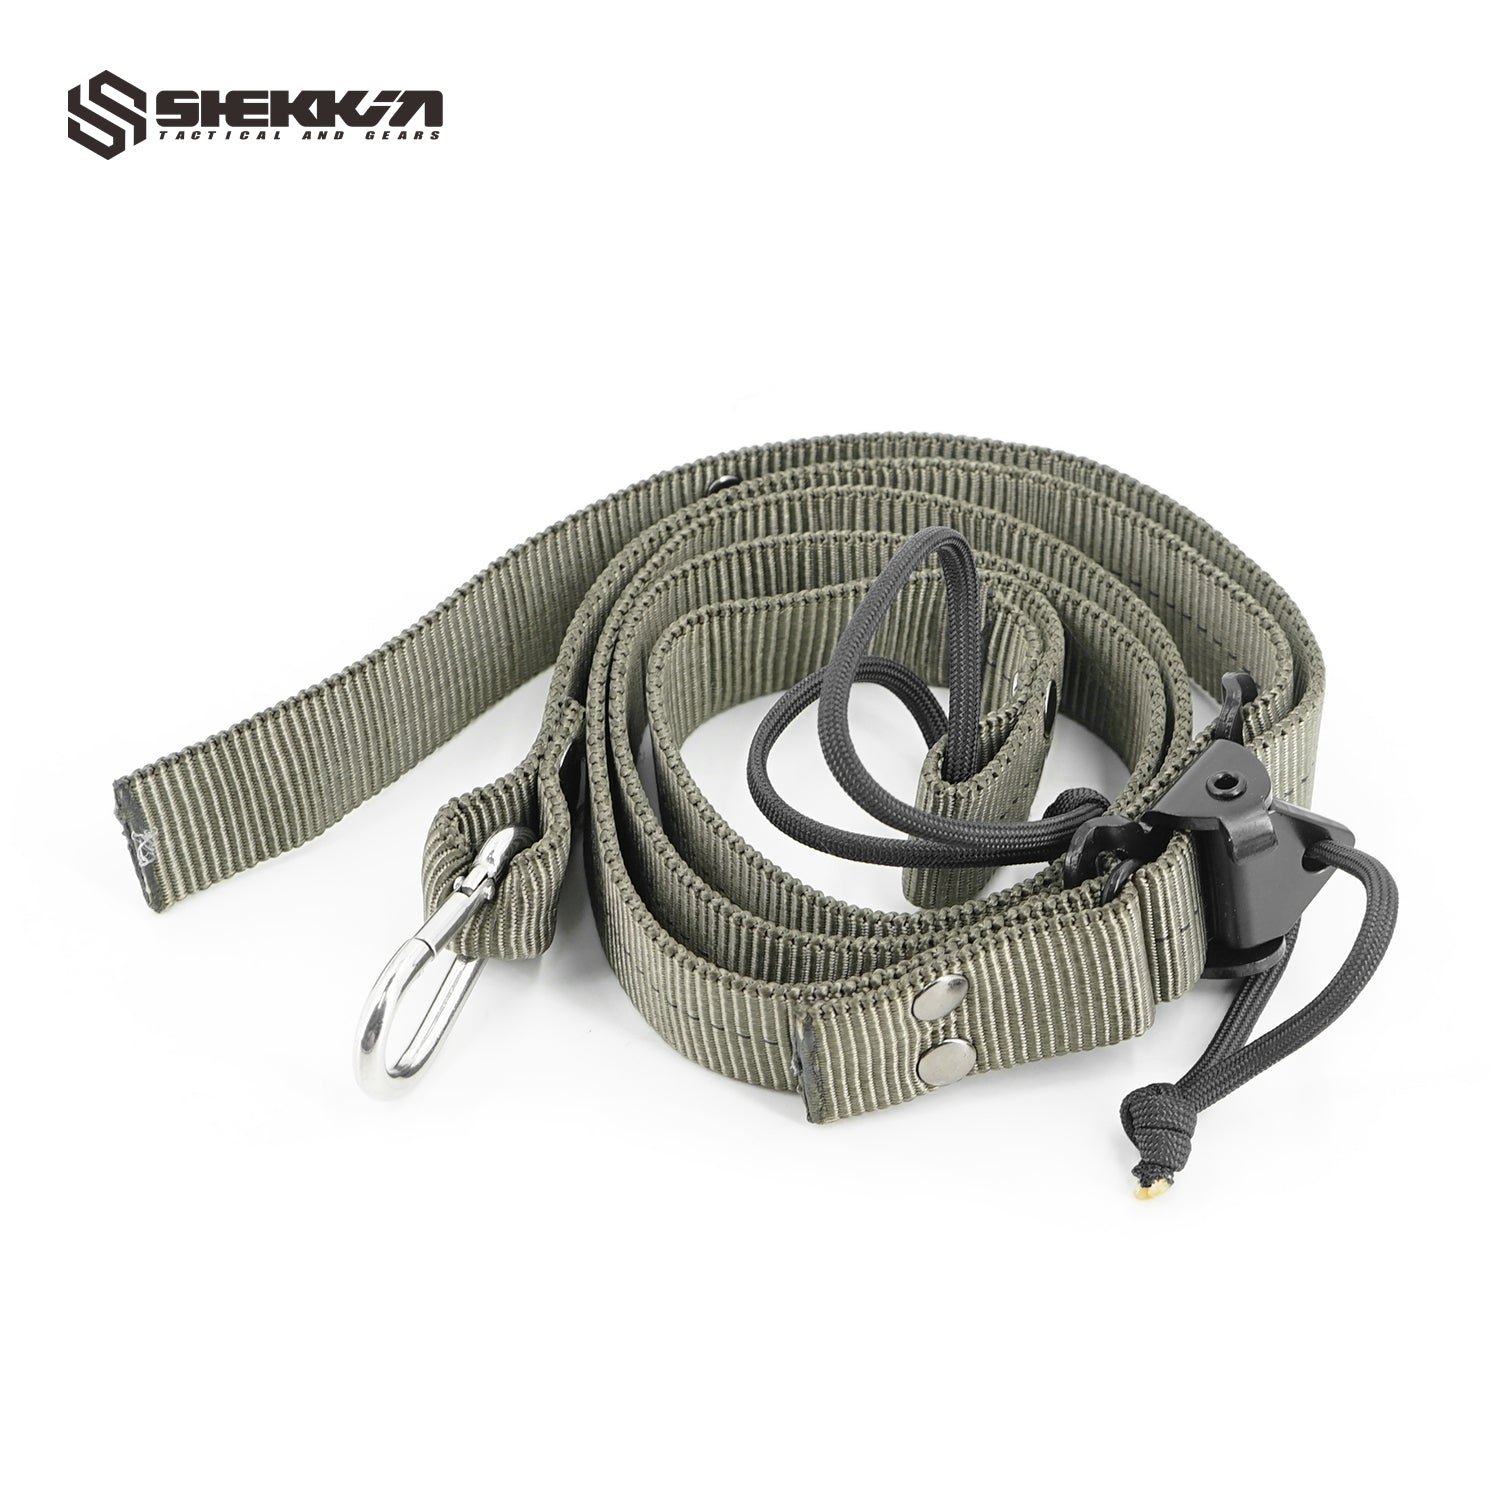 Old gen CAG two point tactical sling - Shekkin Gears